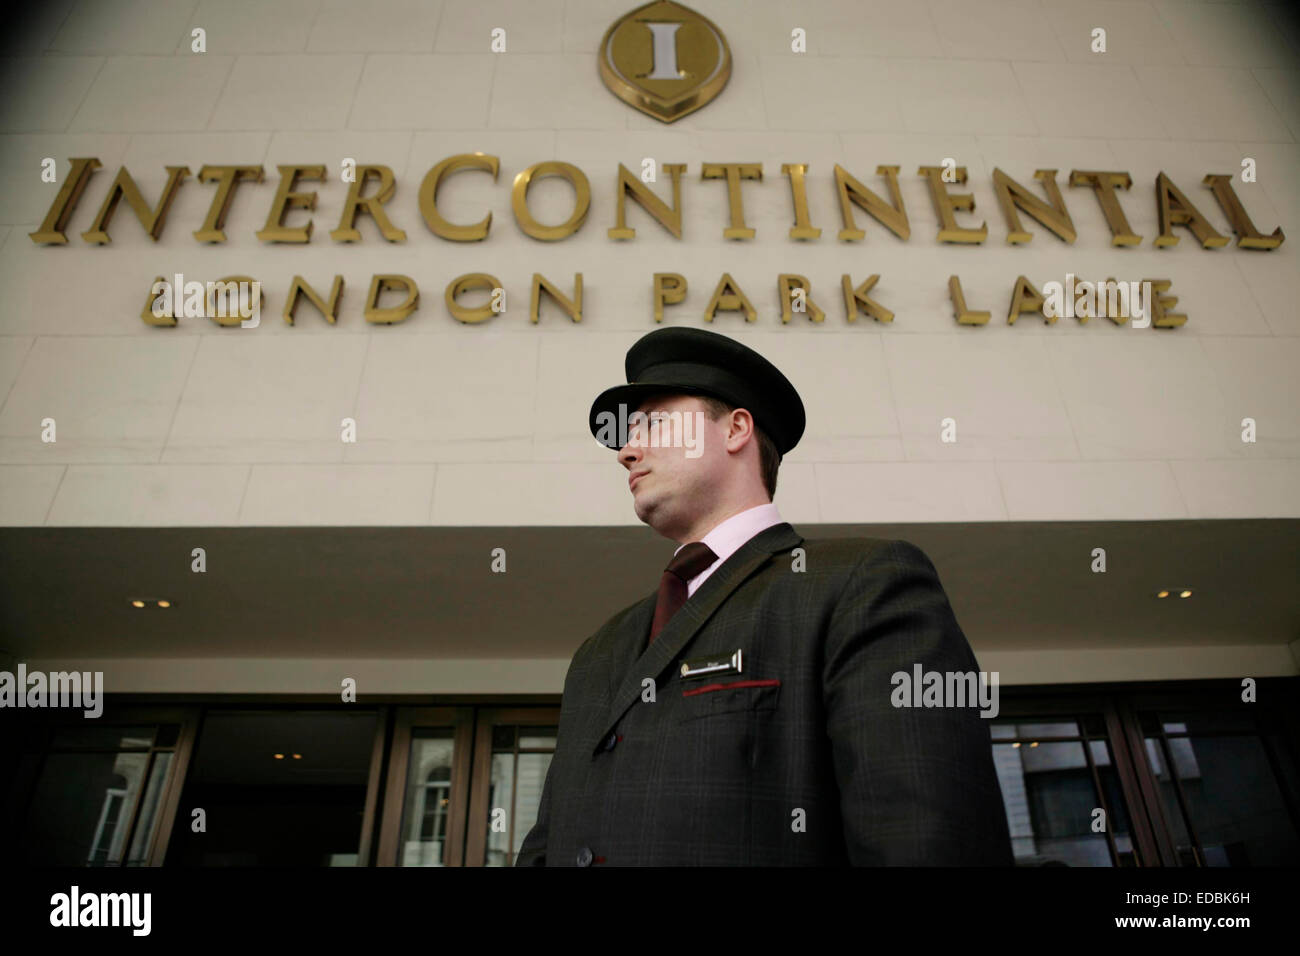 Exterior of the Intercontinental Hotel on Park Lane, London. Stock Photo